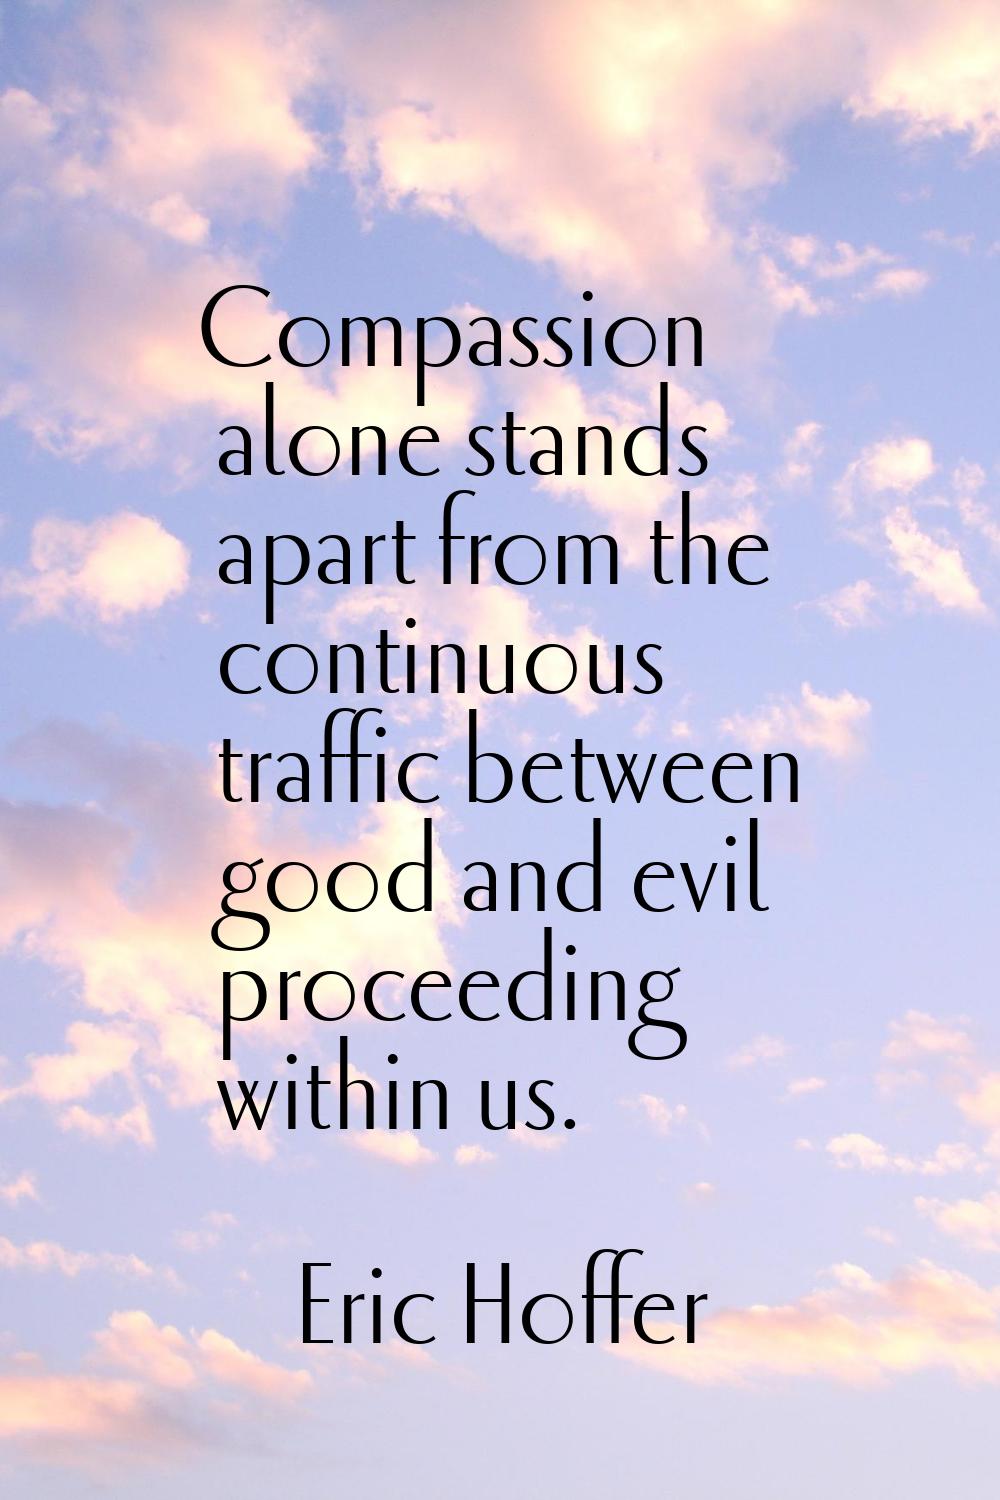 Compassion alone stands apart from the continuous traffic between good and evil proceeding within u